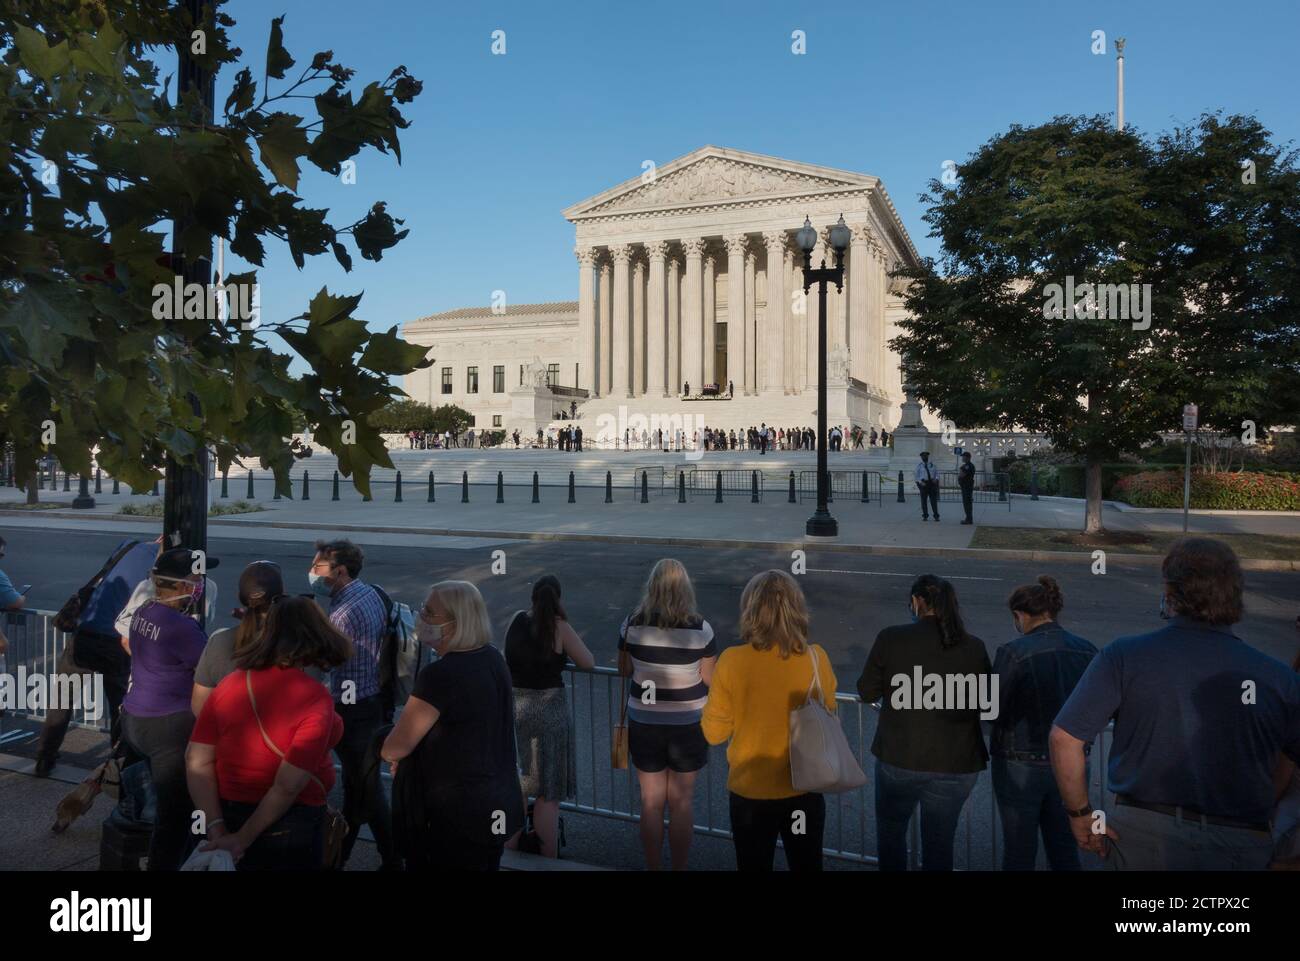 Sept. 23, 2020 - With the casket of Supreme Court Justice Ruth Bader Ginsburg under the portico, a steady stream of people pass by to pay their respects, while others watch from across the street. Stock Photo